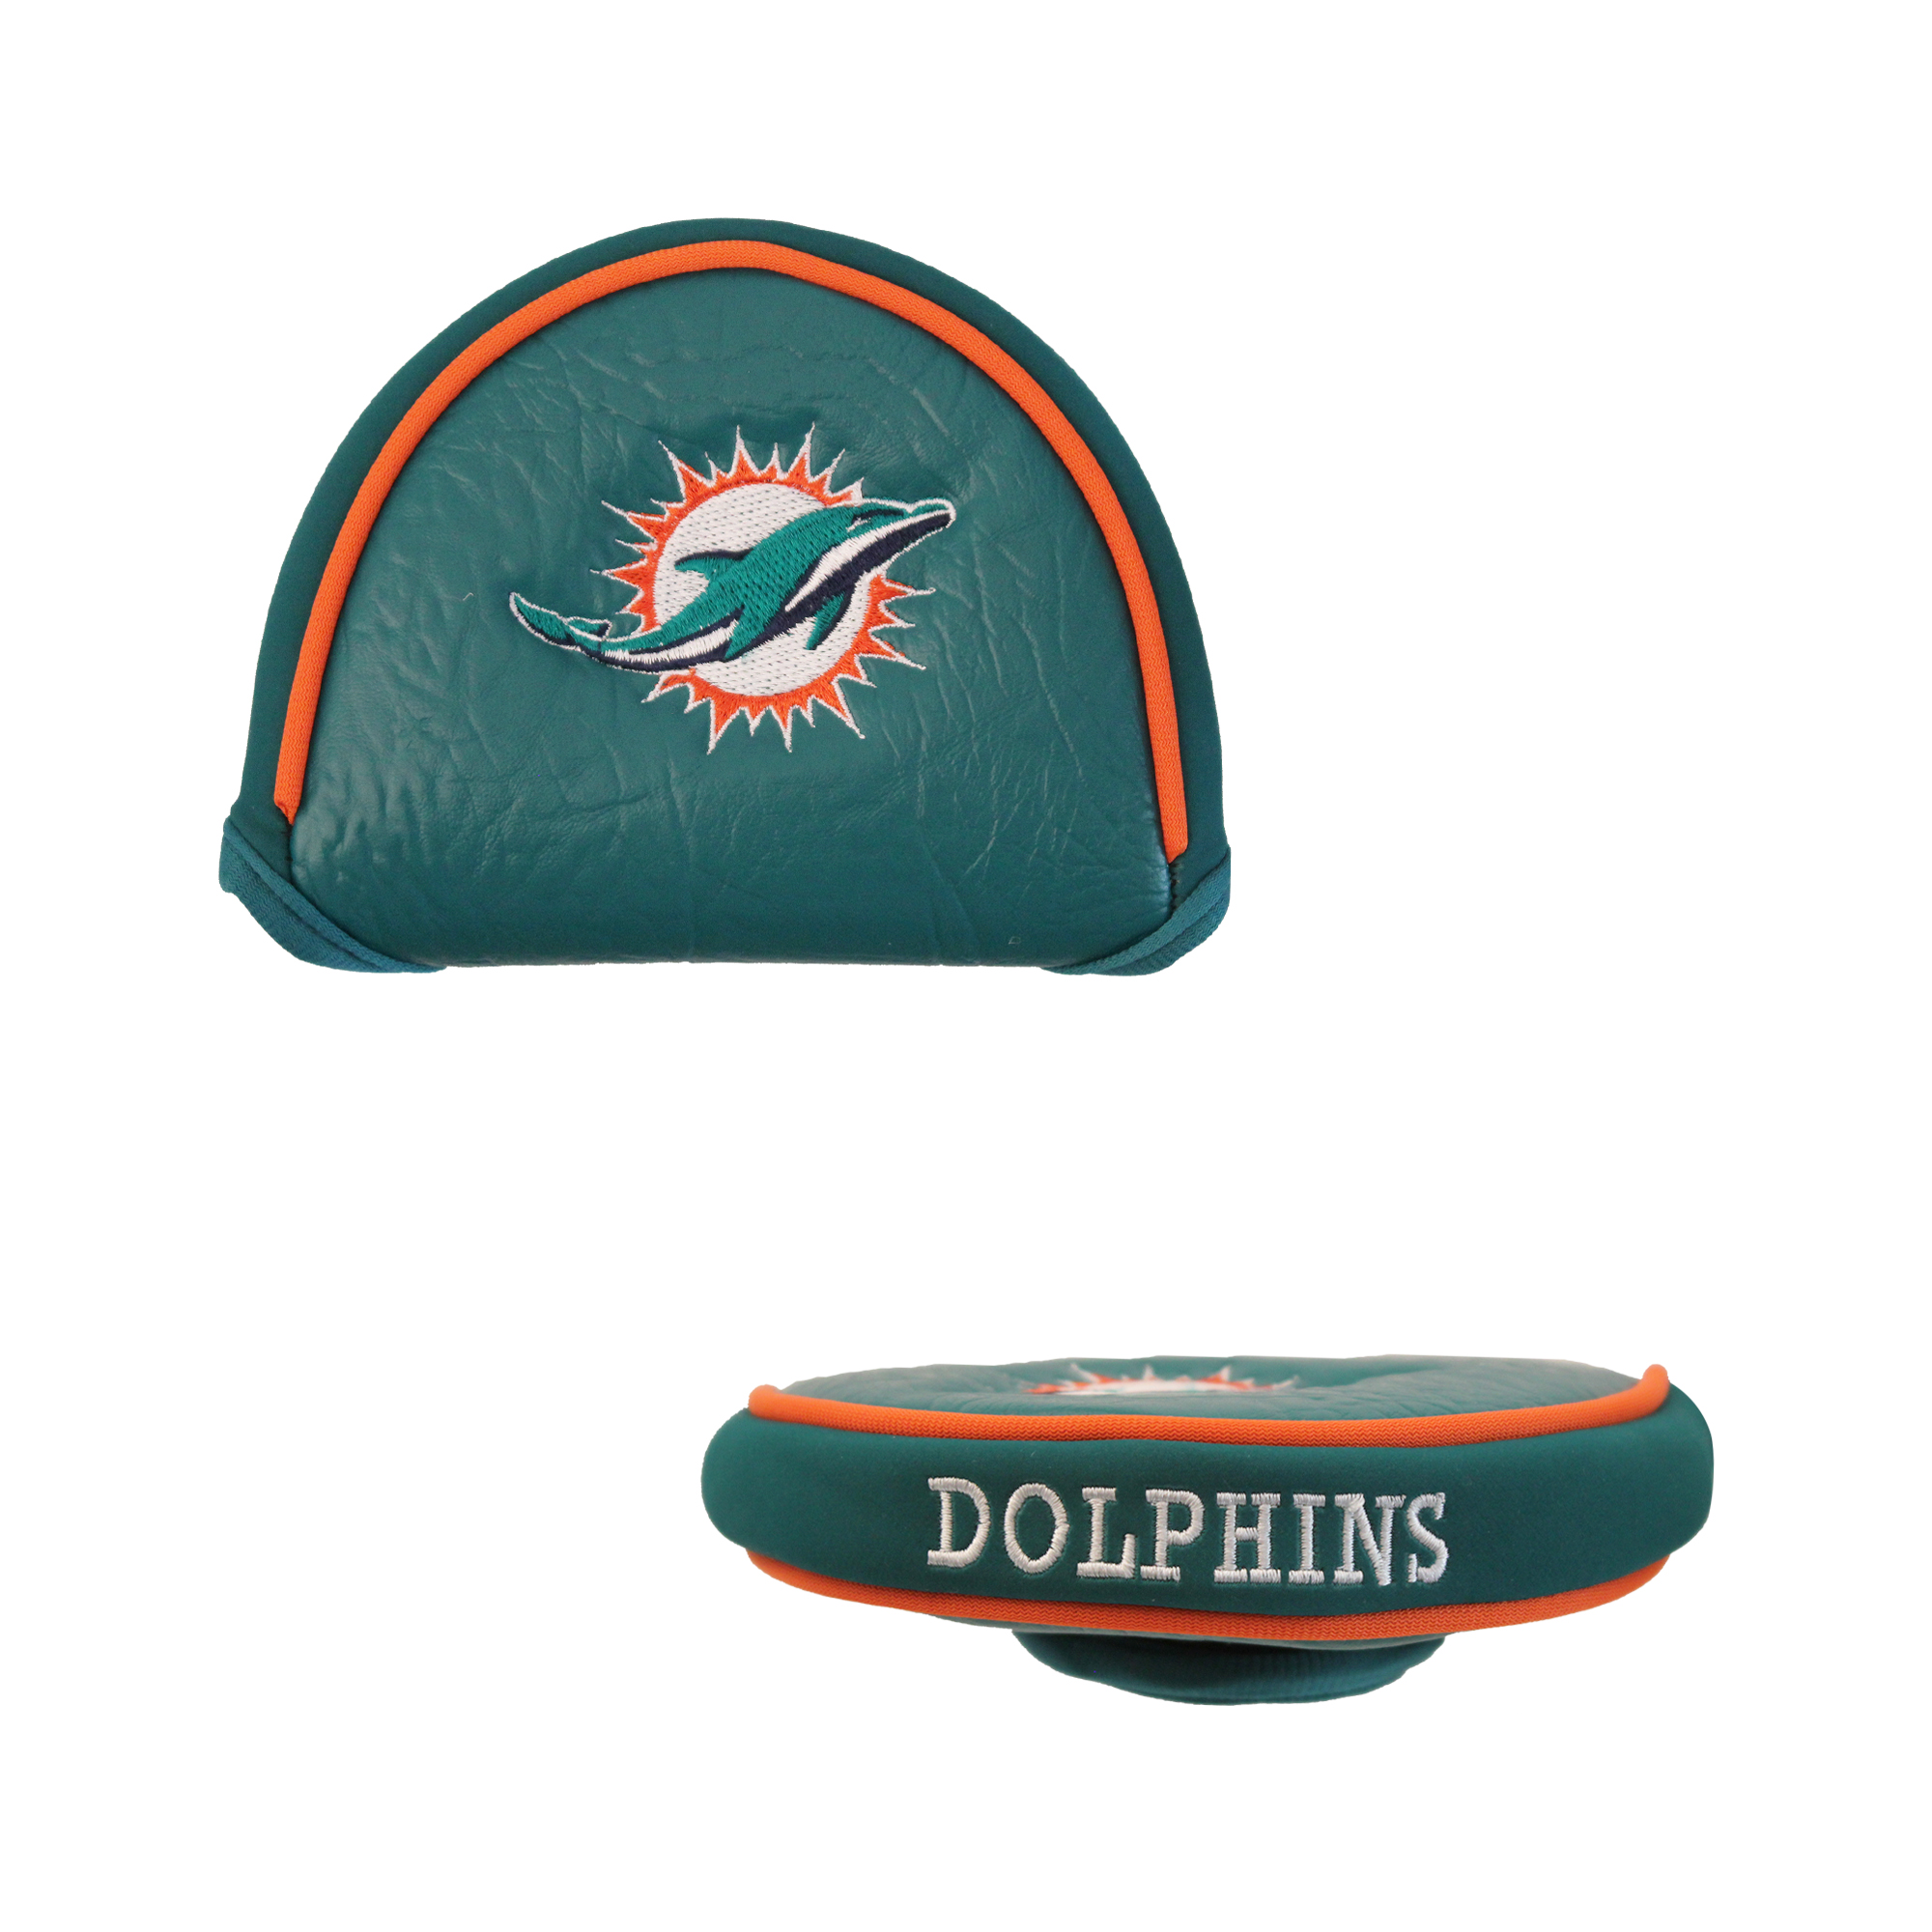 Miami Dolphins Mallet Putter Cover